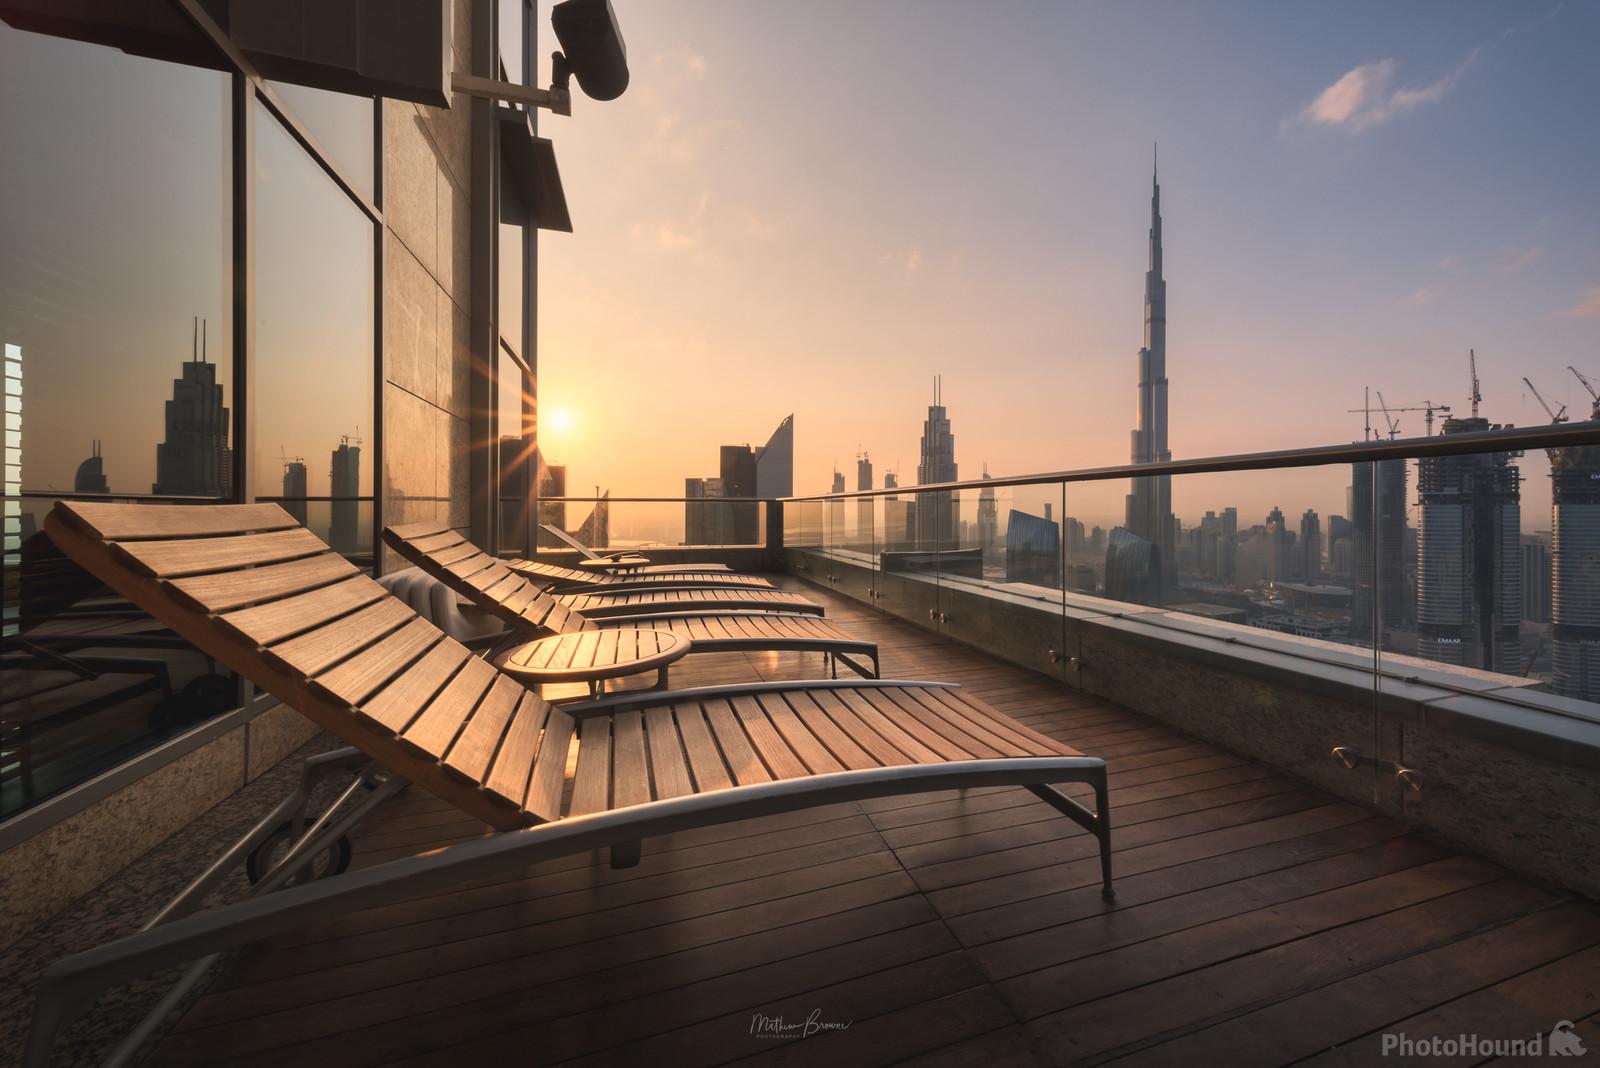 Image of The View At 42 - Shangri-La Hotel by Mathew Browne